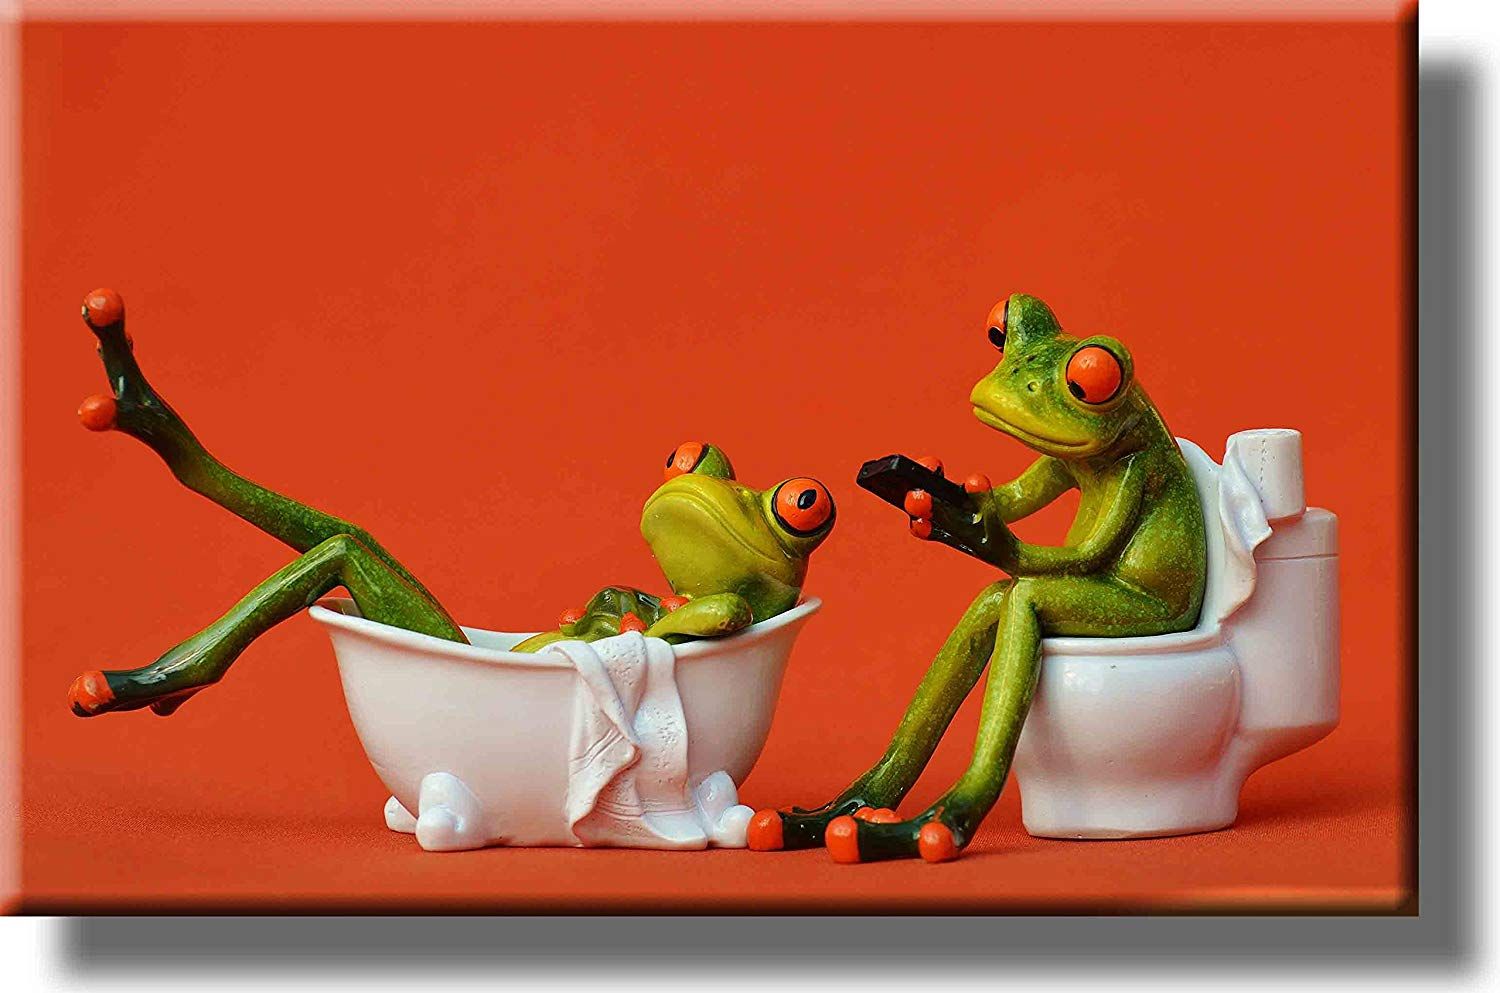 Wall Art Painting On Canvas Frog In Bathroom Wall Decor Funny Frog Painting  For Livingroom Bedroom Decoration Framed Painting Ready To Hang –  Walmart For Newest Frog Wall Art (View 2 of 20)